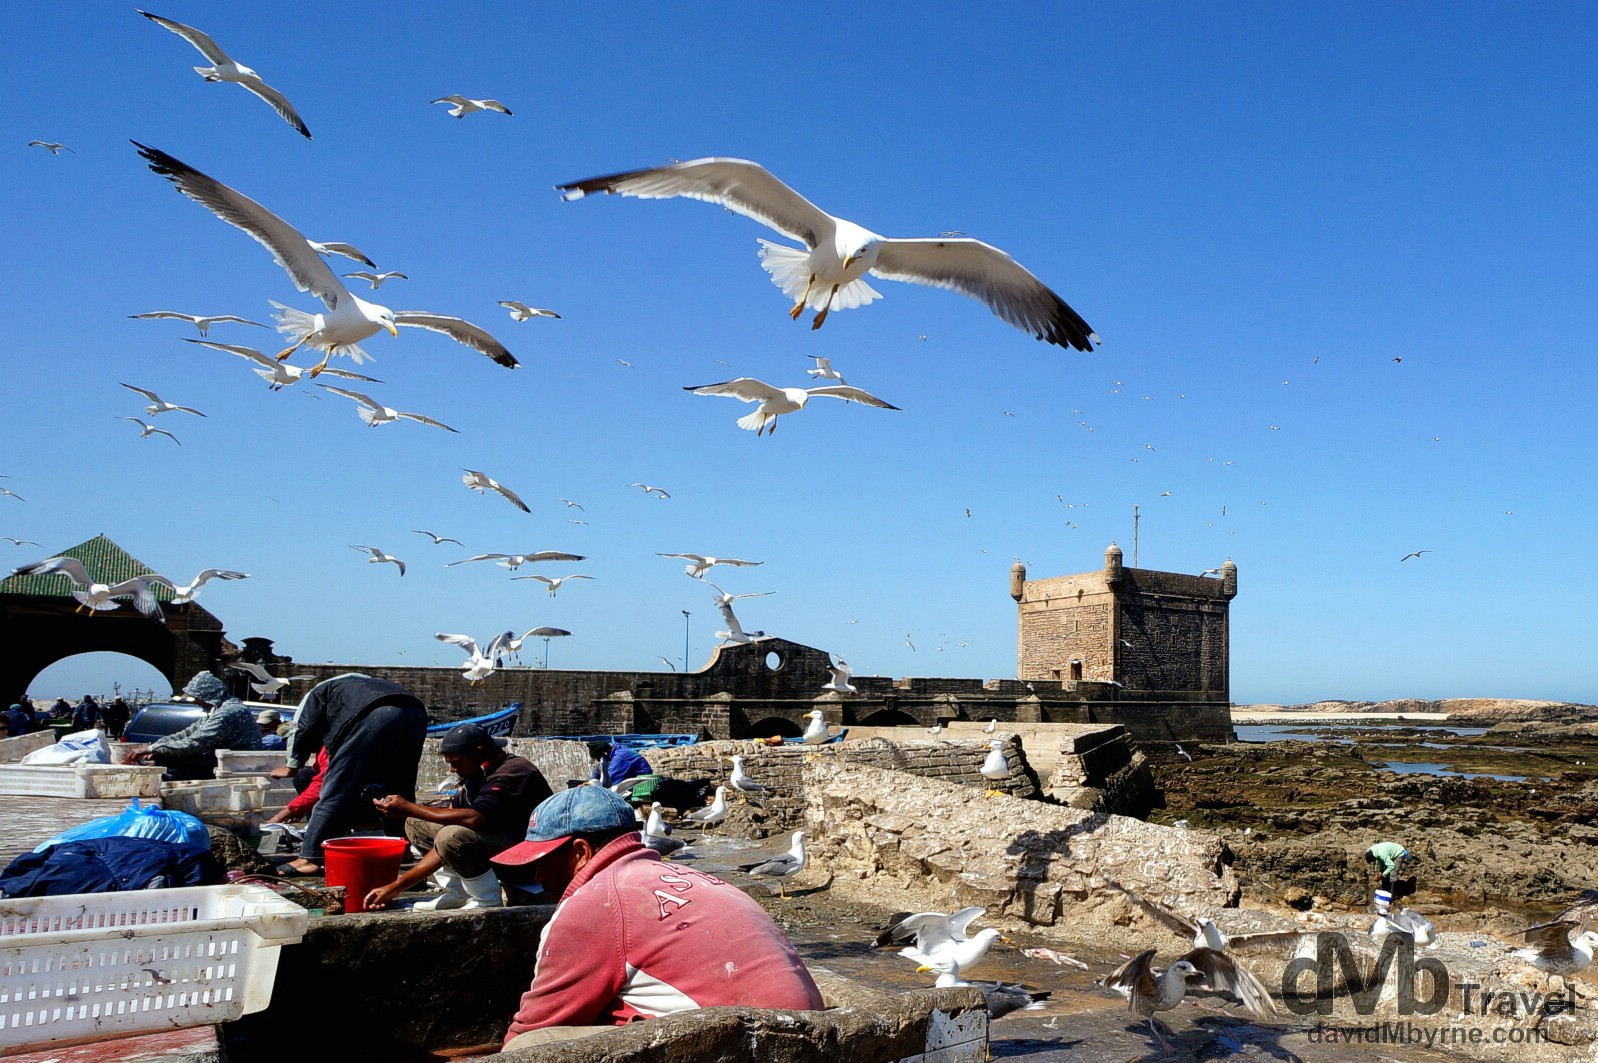 Gulls swooping overhead for remnants of fish being gutted in Essaouira, Morocco. May 3rd, 2014.